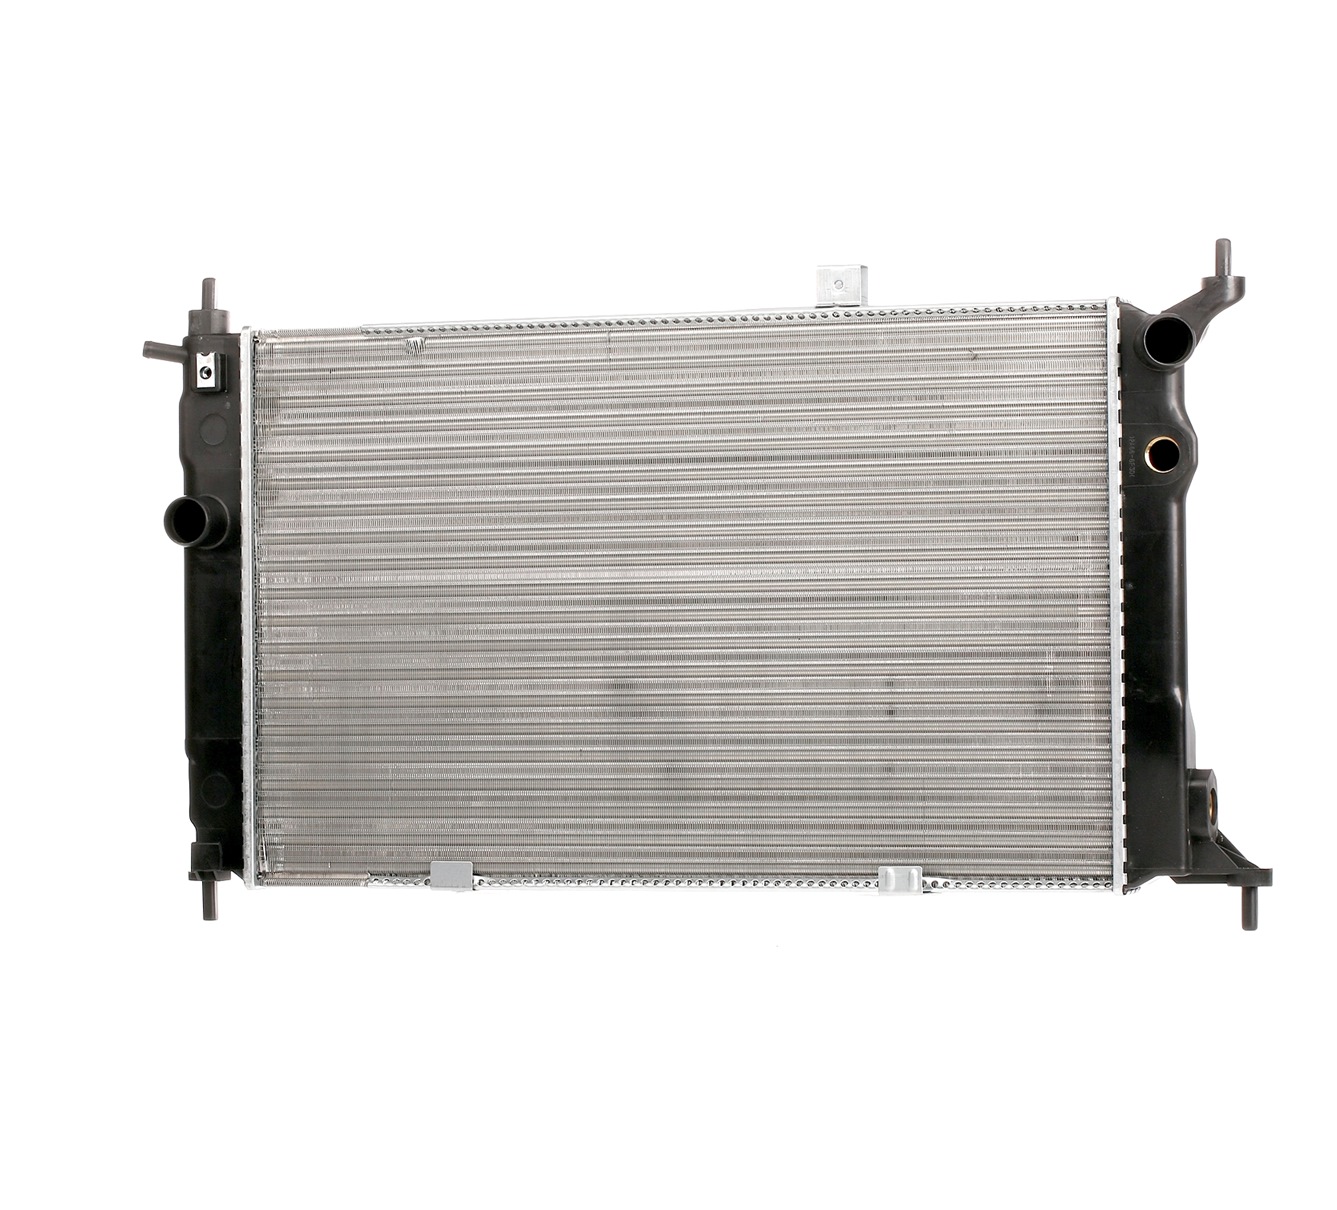 STARK Aluminium, for vehicles with air conditioning, 590 x 378 x 34 mm, Manual Transmission Radiator SKRD-0120339 buy